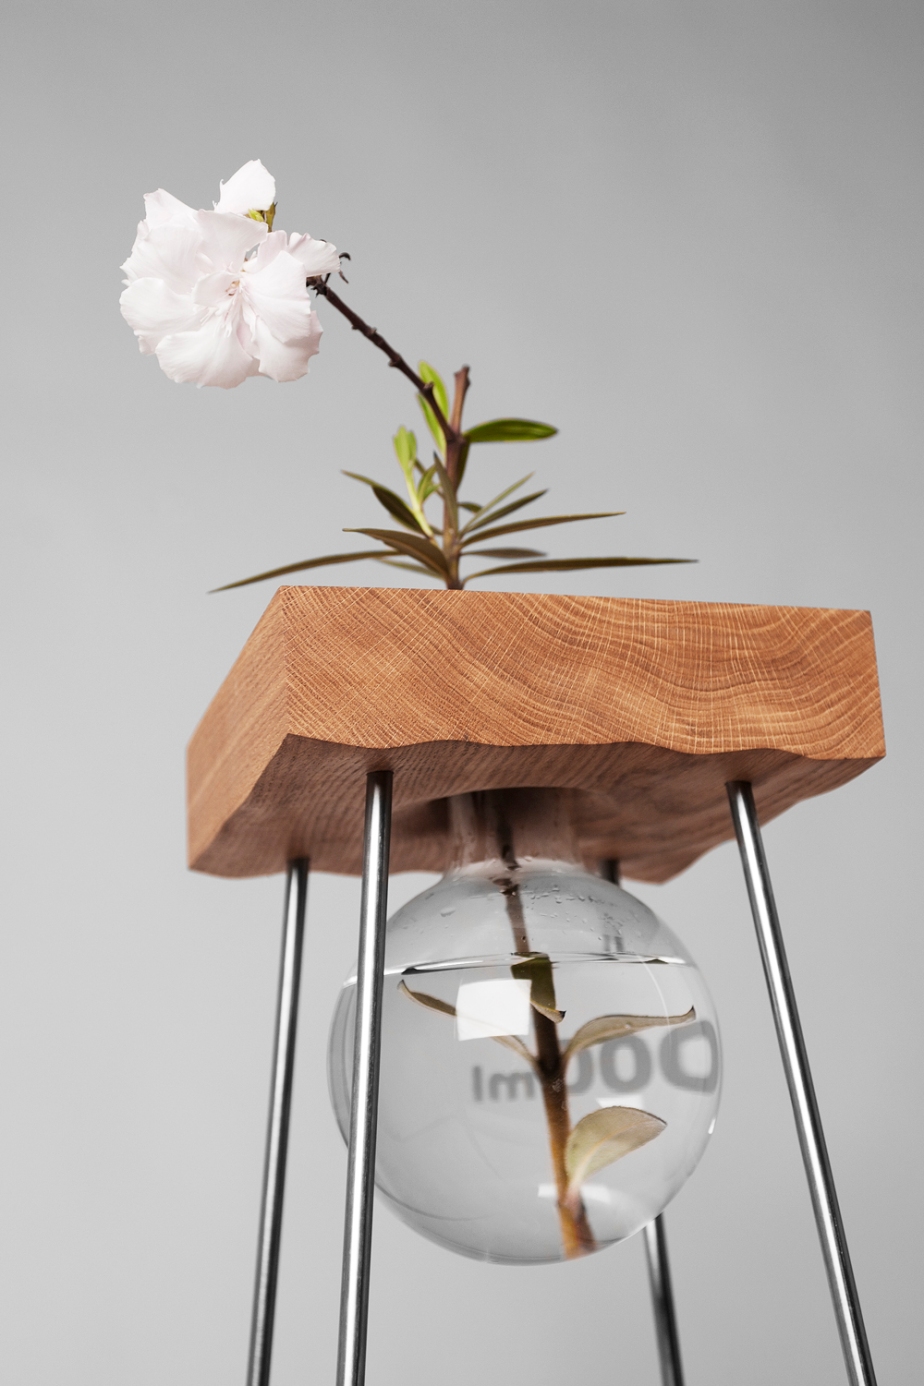 Table for a Flower by Adam and Sam Cigler of Studio Vjem (3)